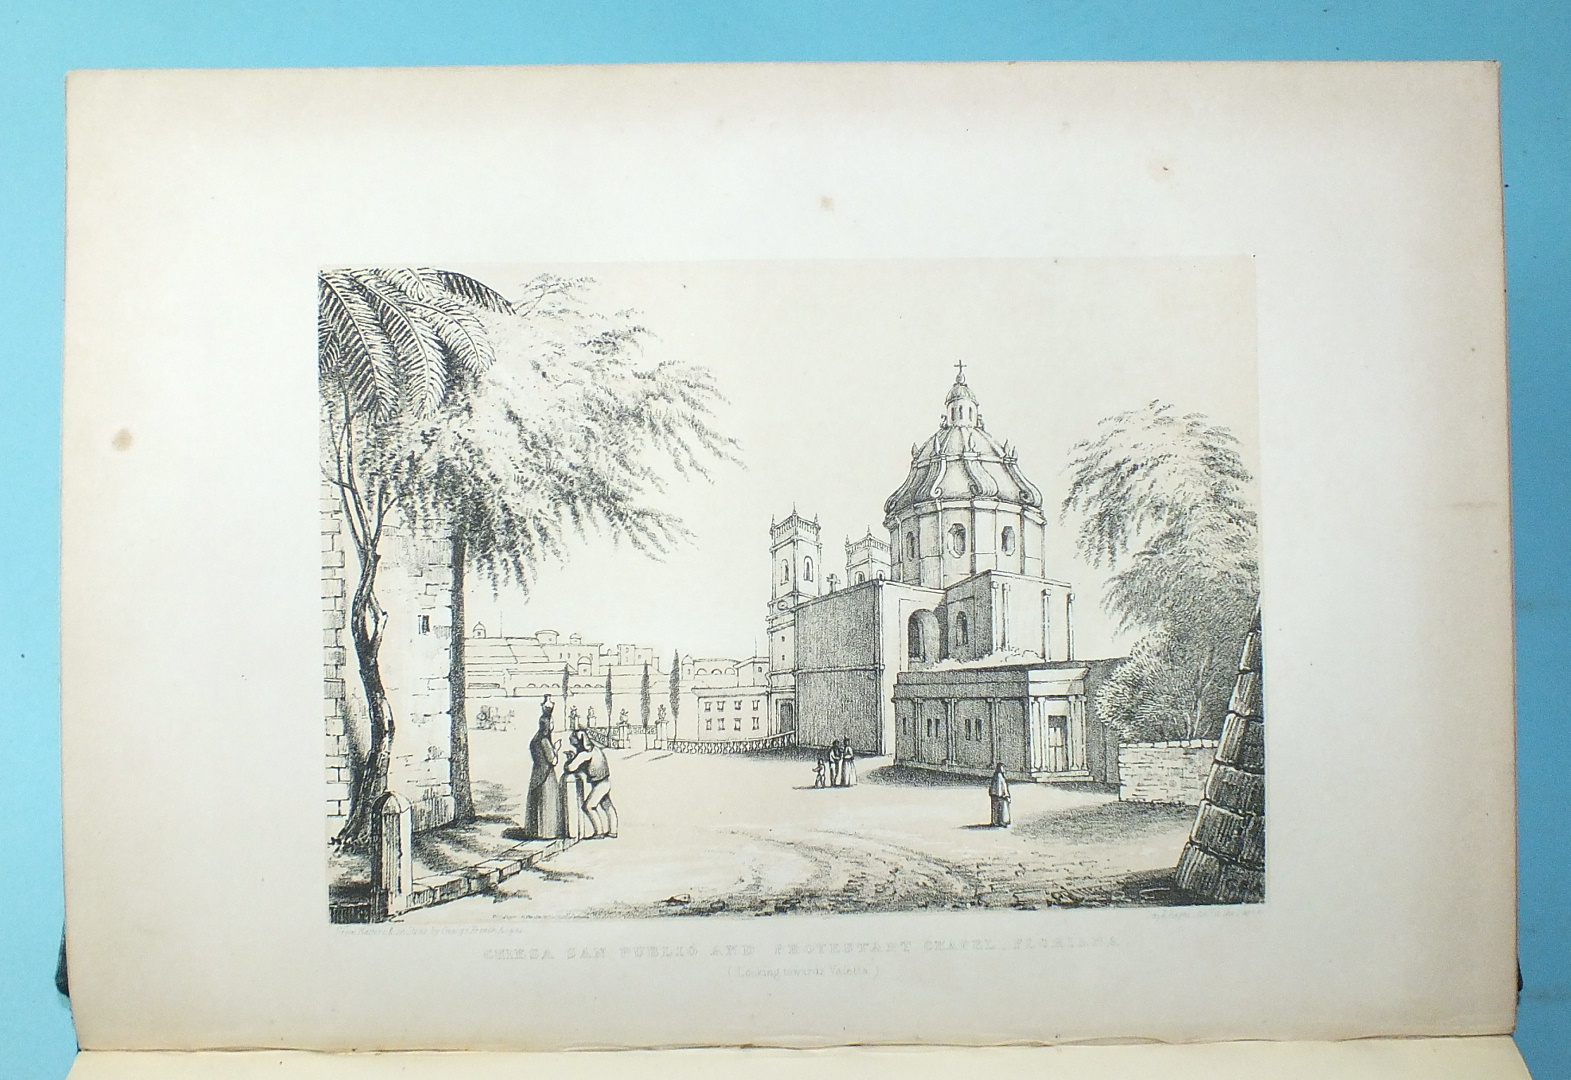 Angas (George French), A Ramble in Malta and Sicily, dedication p loose, 12 litho plts, ge, rebacked - Image 3 of 3